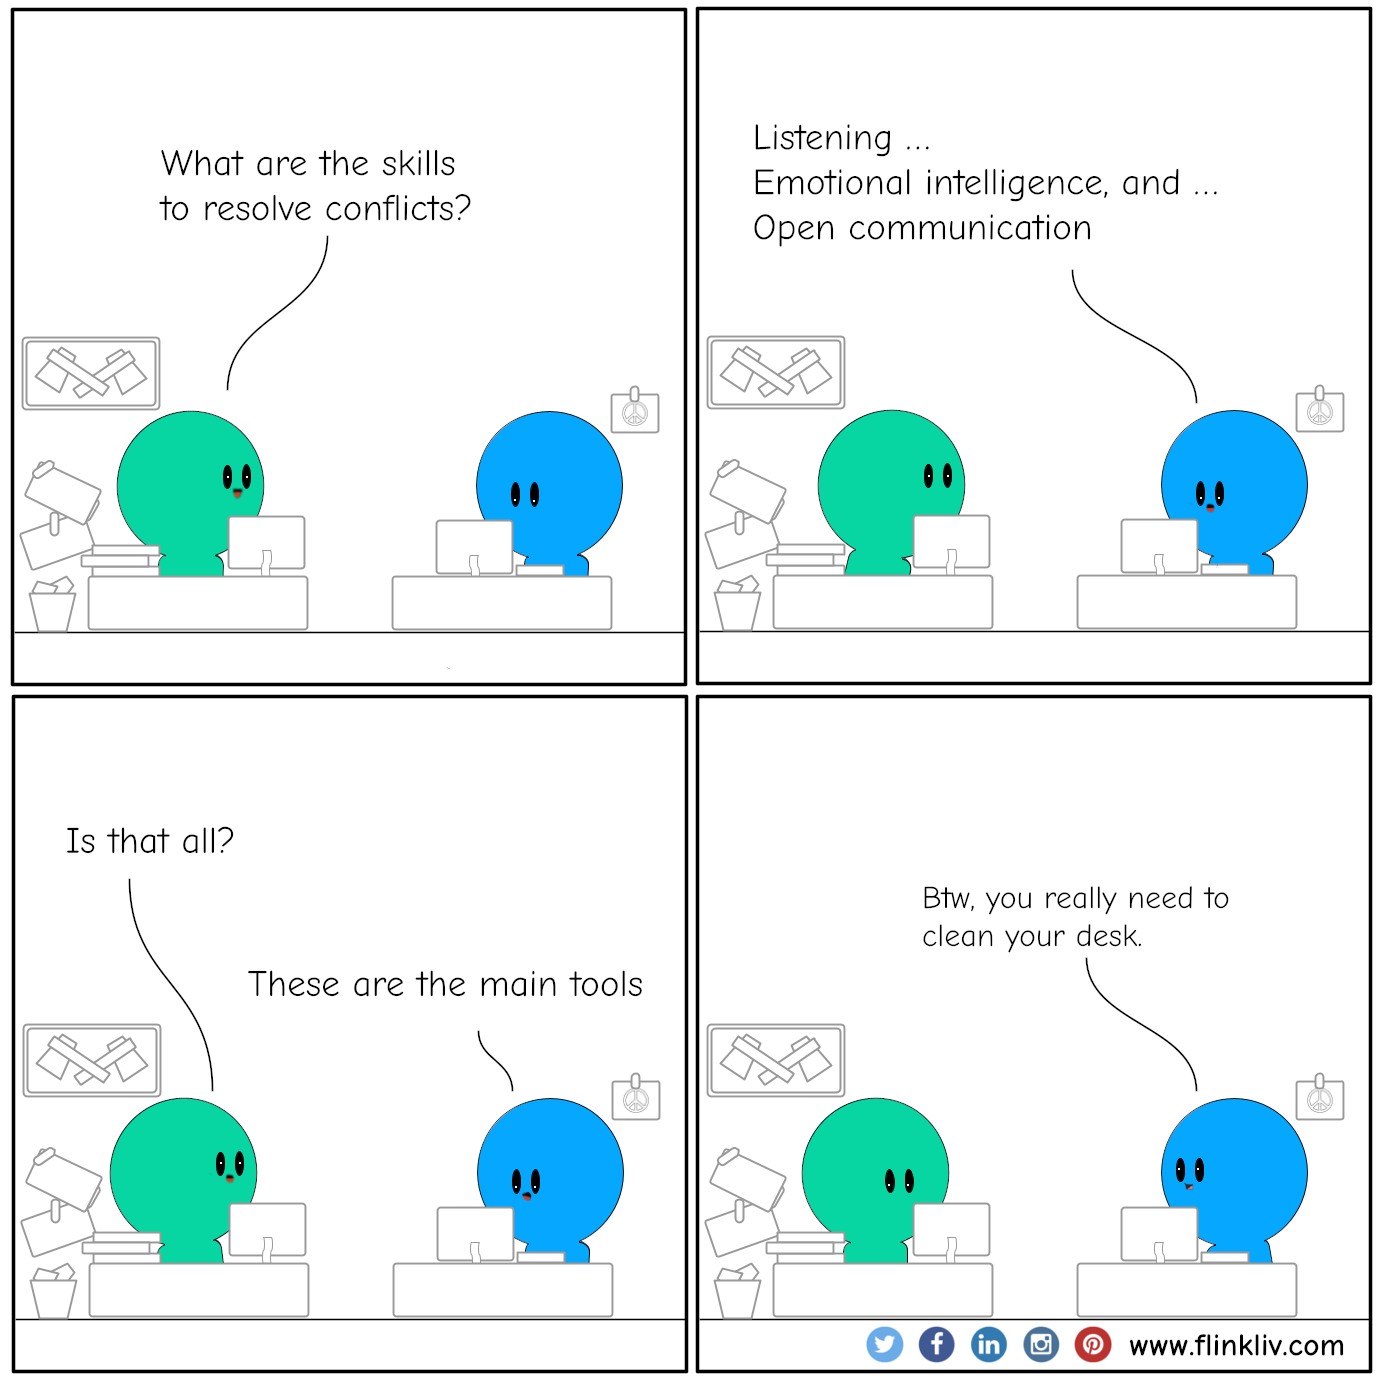 Conversation between A and B about conflict management skills. 
A: What are the skills to resolve conflicts?
B: Listening, emotional intelligence, and open communication.

A: Is that all?
B: These are the main tools.

B: Btw, you really need to clean your desk.
By flinkliv.com
